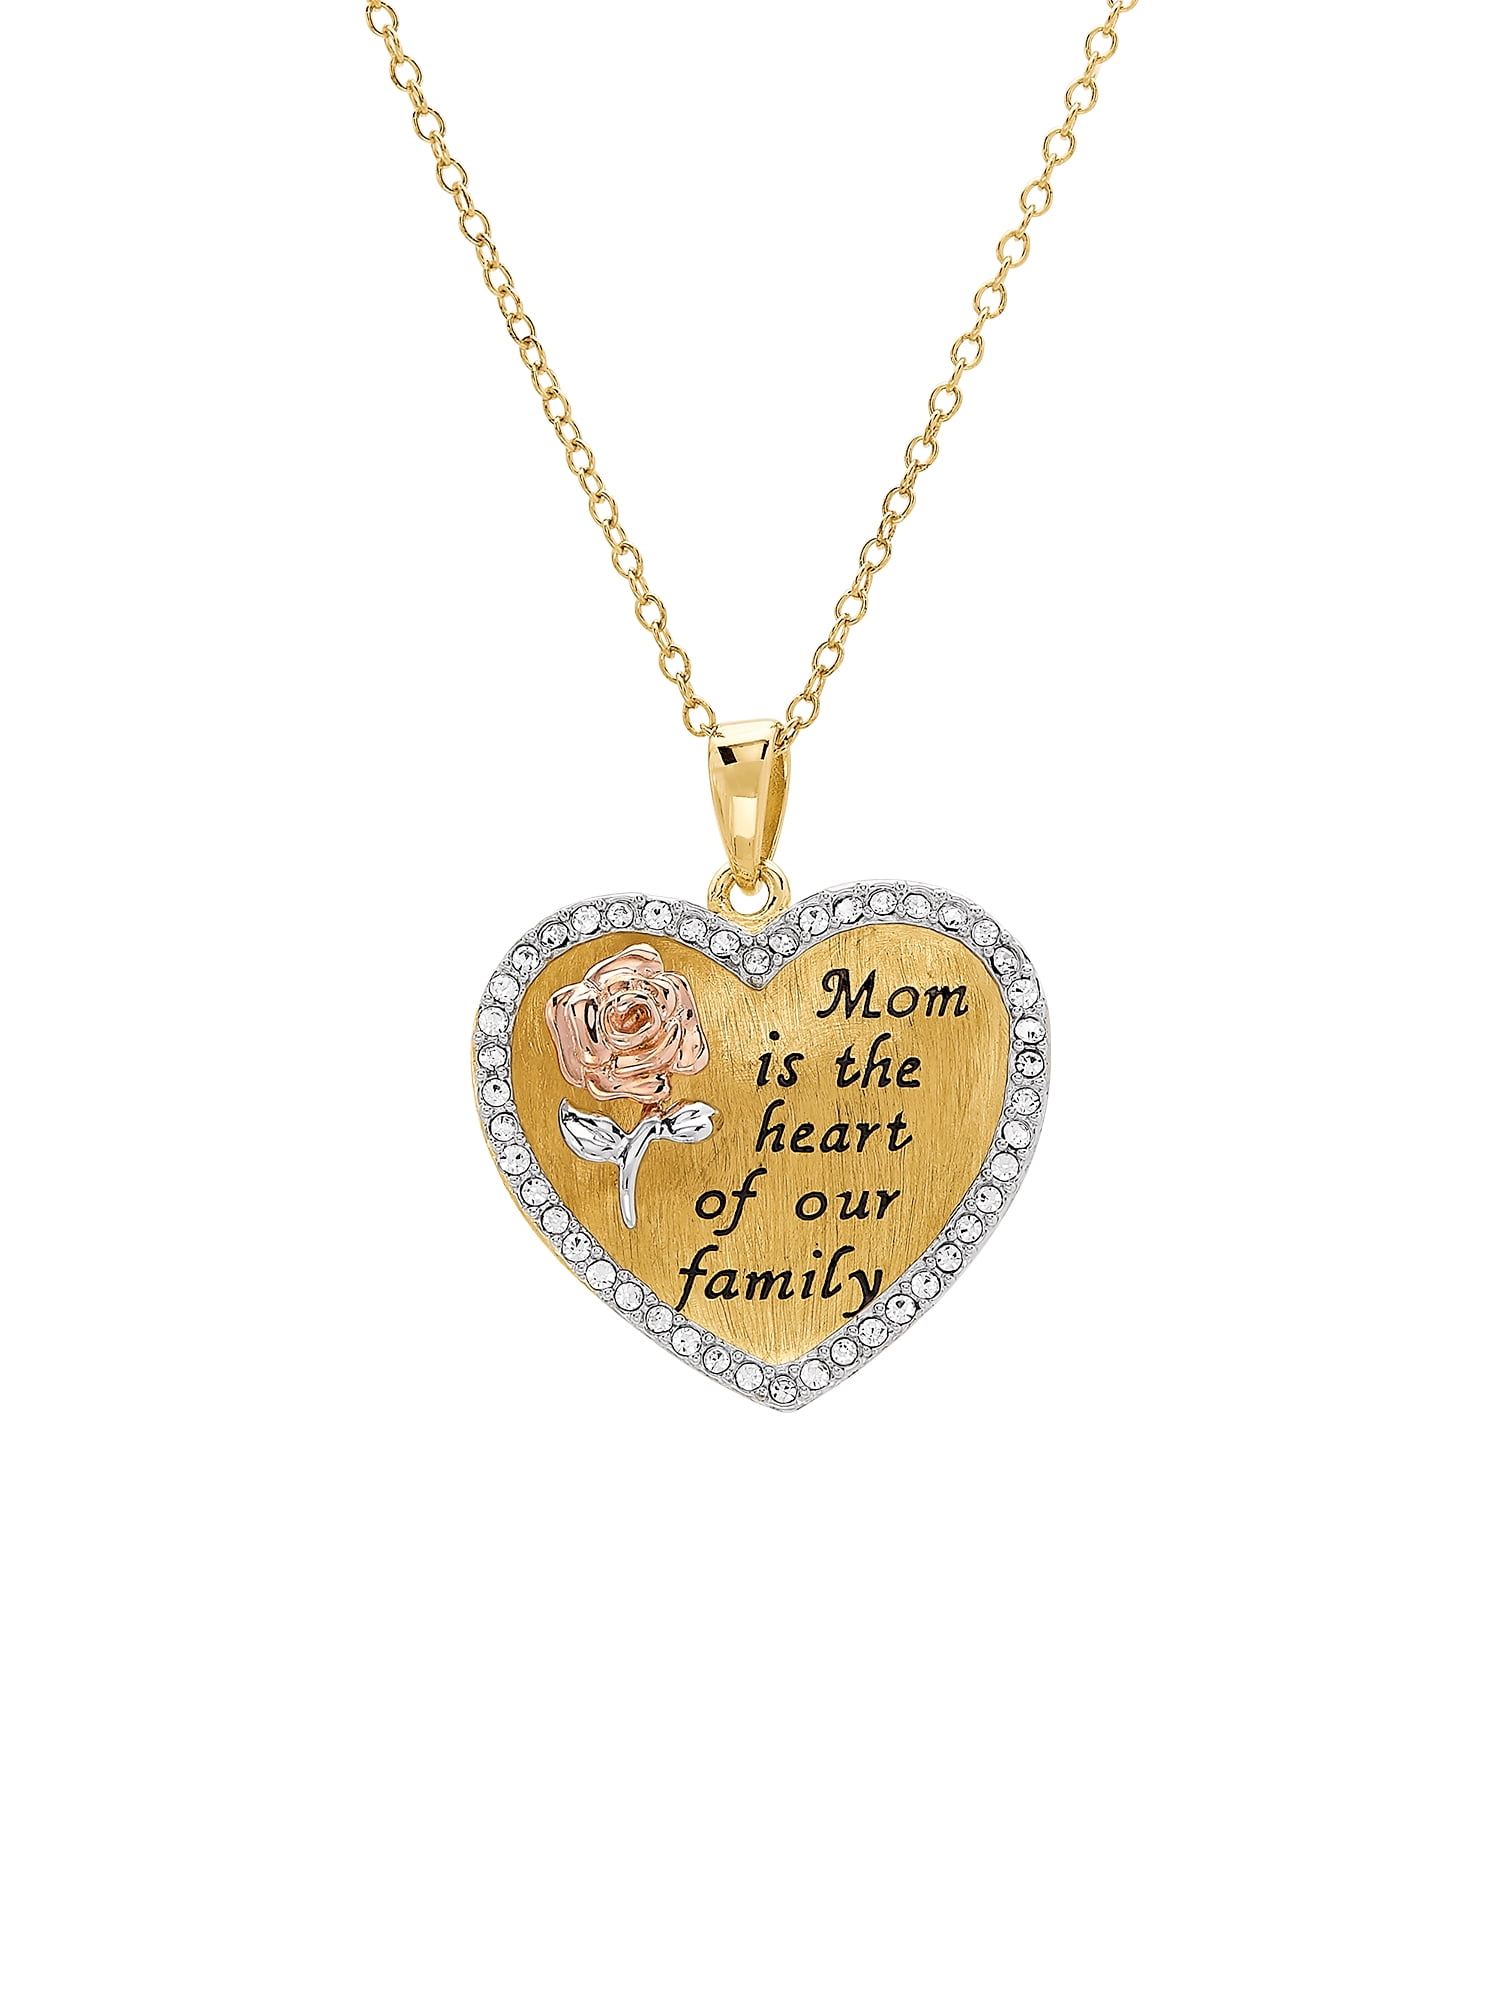 18 Necklace Mothers Day Special HN Jewels 14K Gold Plated .925 Diamond Accent Mom Heart Pendant 